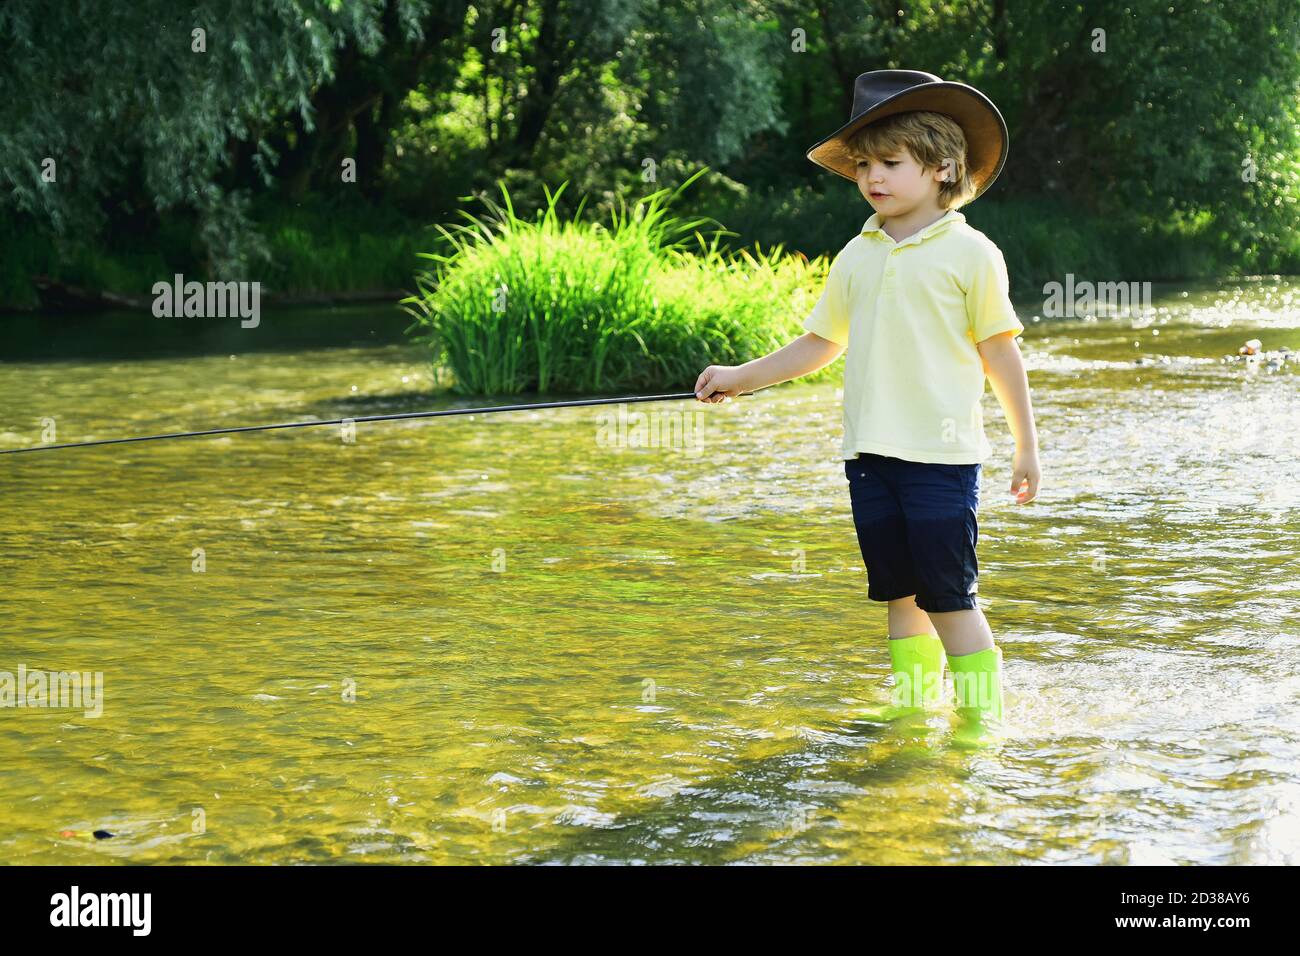 https://c8.alamy.com/comp/2D38AY6/young-boy-fishing-in-a-forest-river-boy-in-yellow-shirt-with-a-fishing-rod-by-the-river-kids-fishing-fisherman-in-a-hat-2D38AY6.jpg